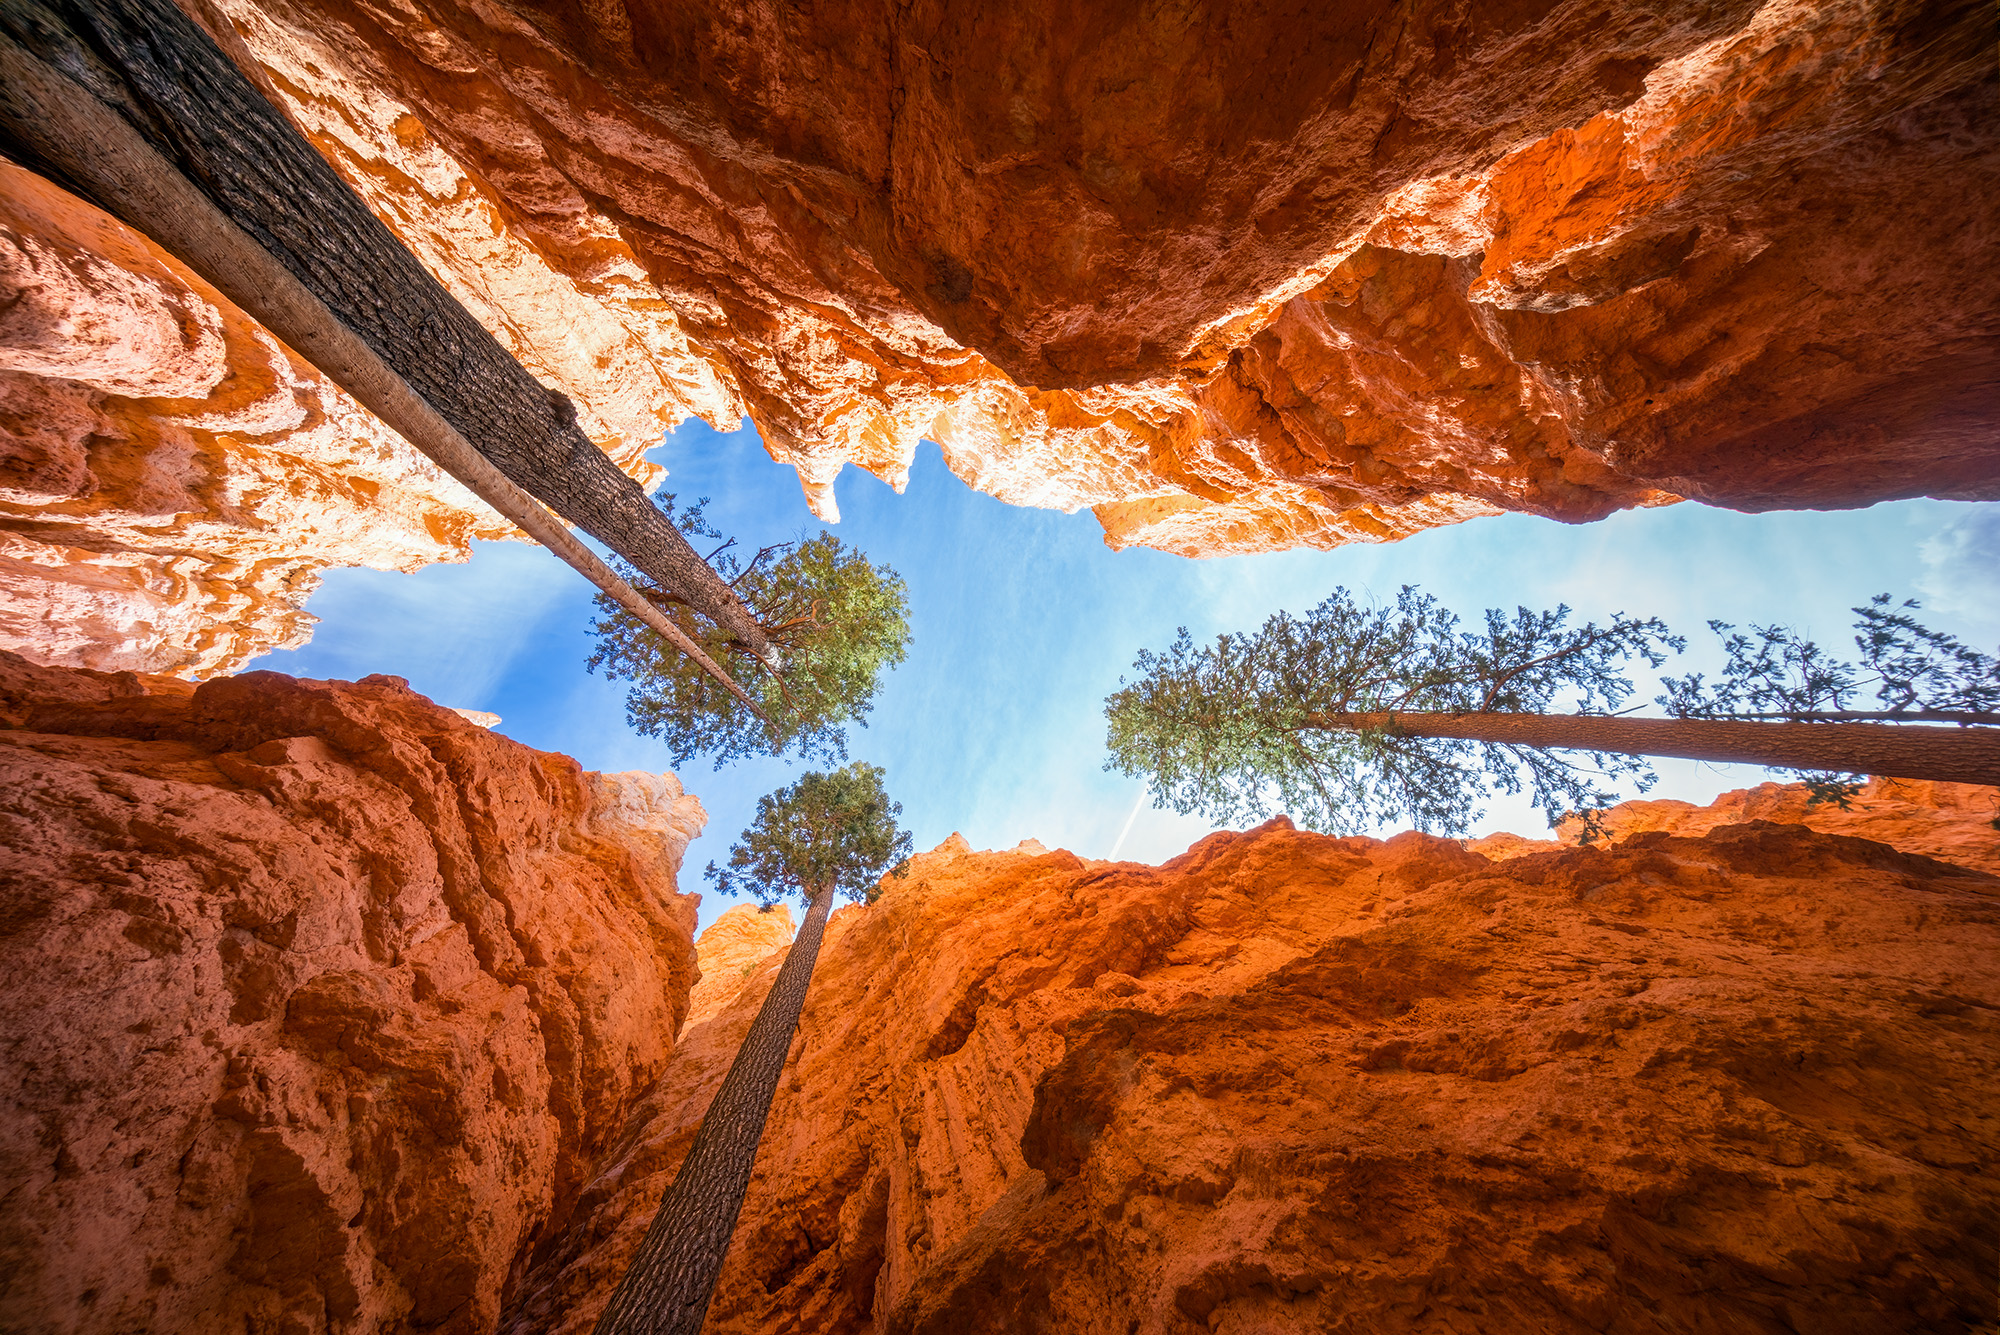 Captured in Bryce Canyon National Park, Utah, this image showcases the awe-inspiring beauty of Wall Street, a renowned hiking...